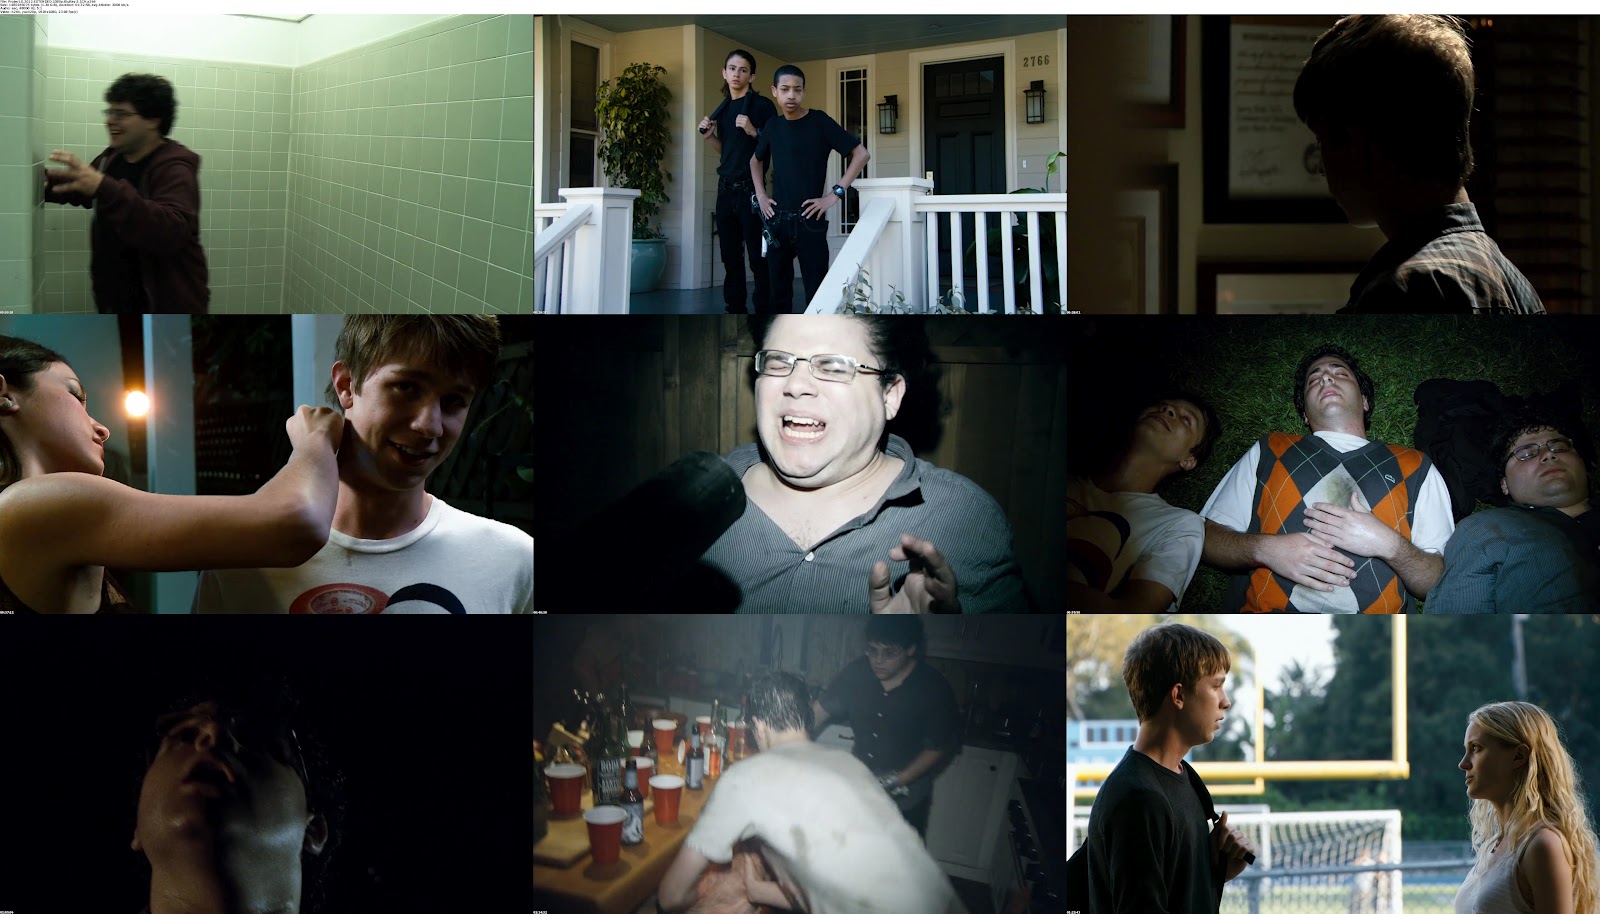 Project X 2012 Movie Trailer